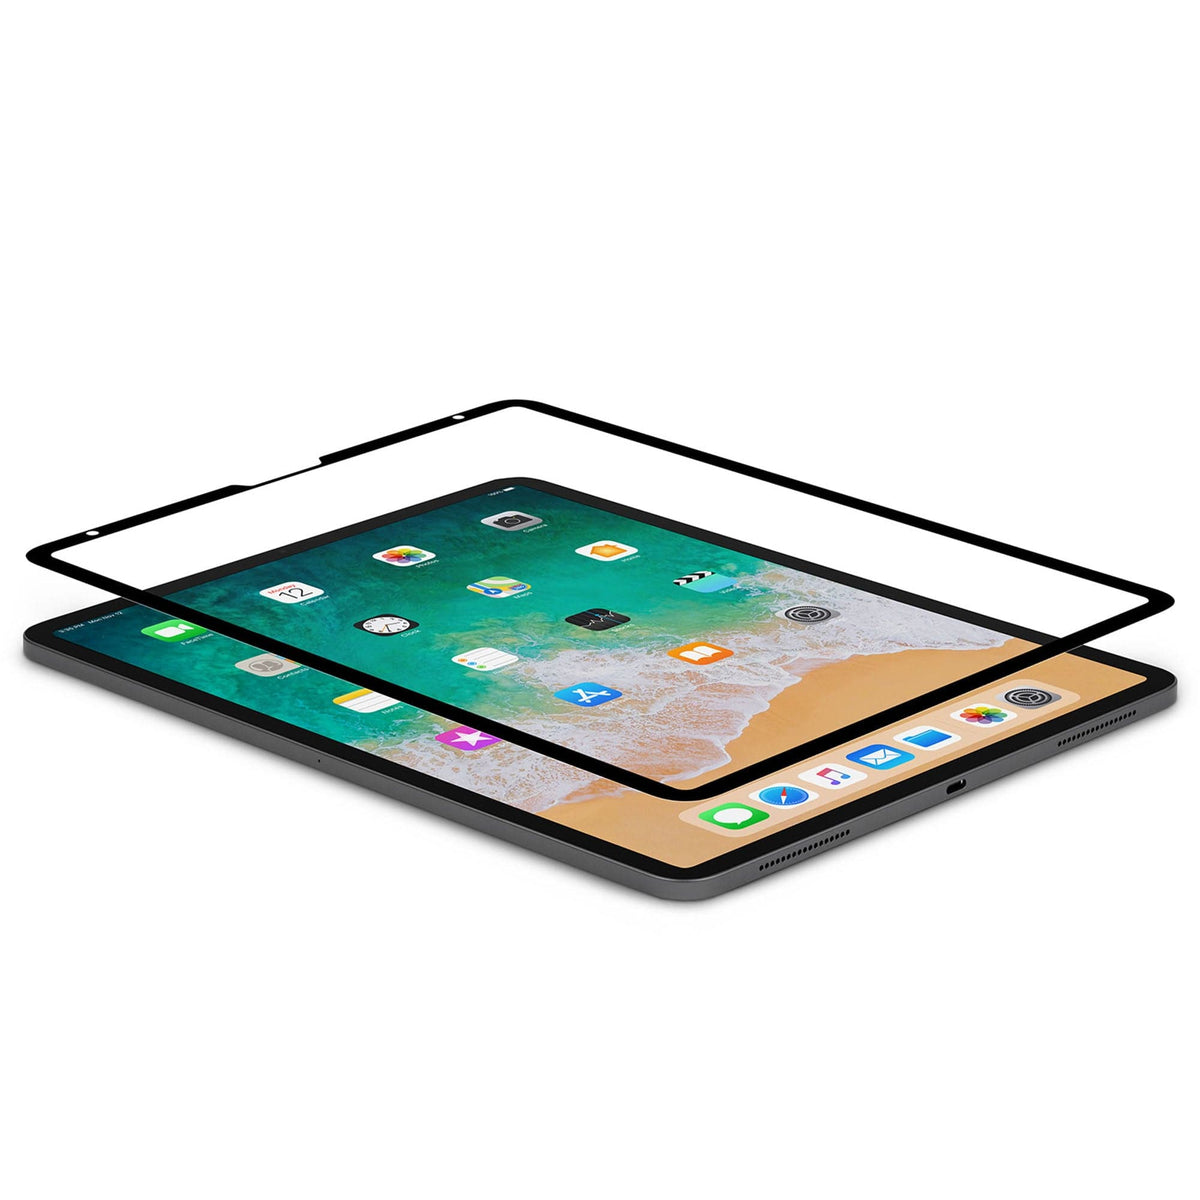 Moshi iVisor AG 100% Bubble-free and Washable Screen Protector for iPad Pro 12.9-inch